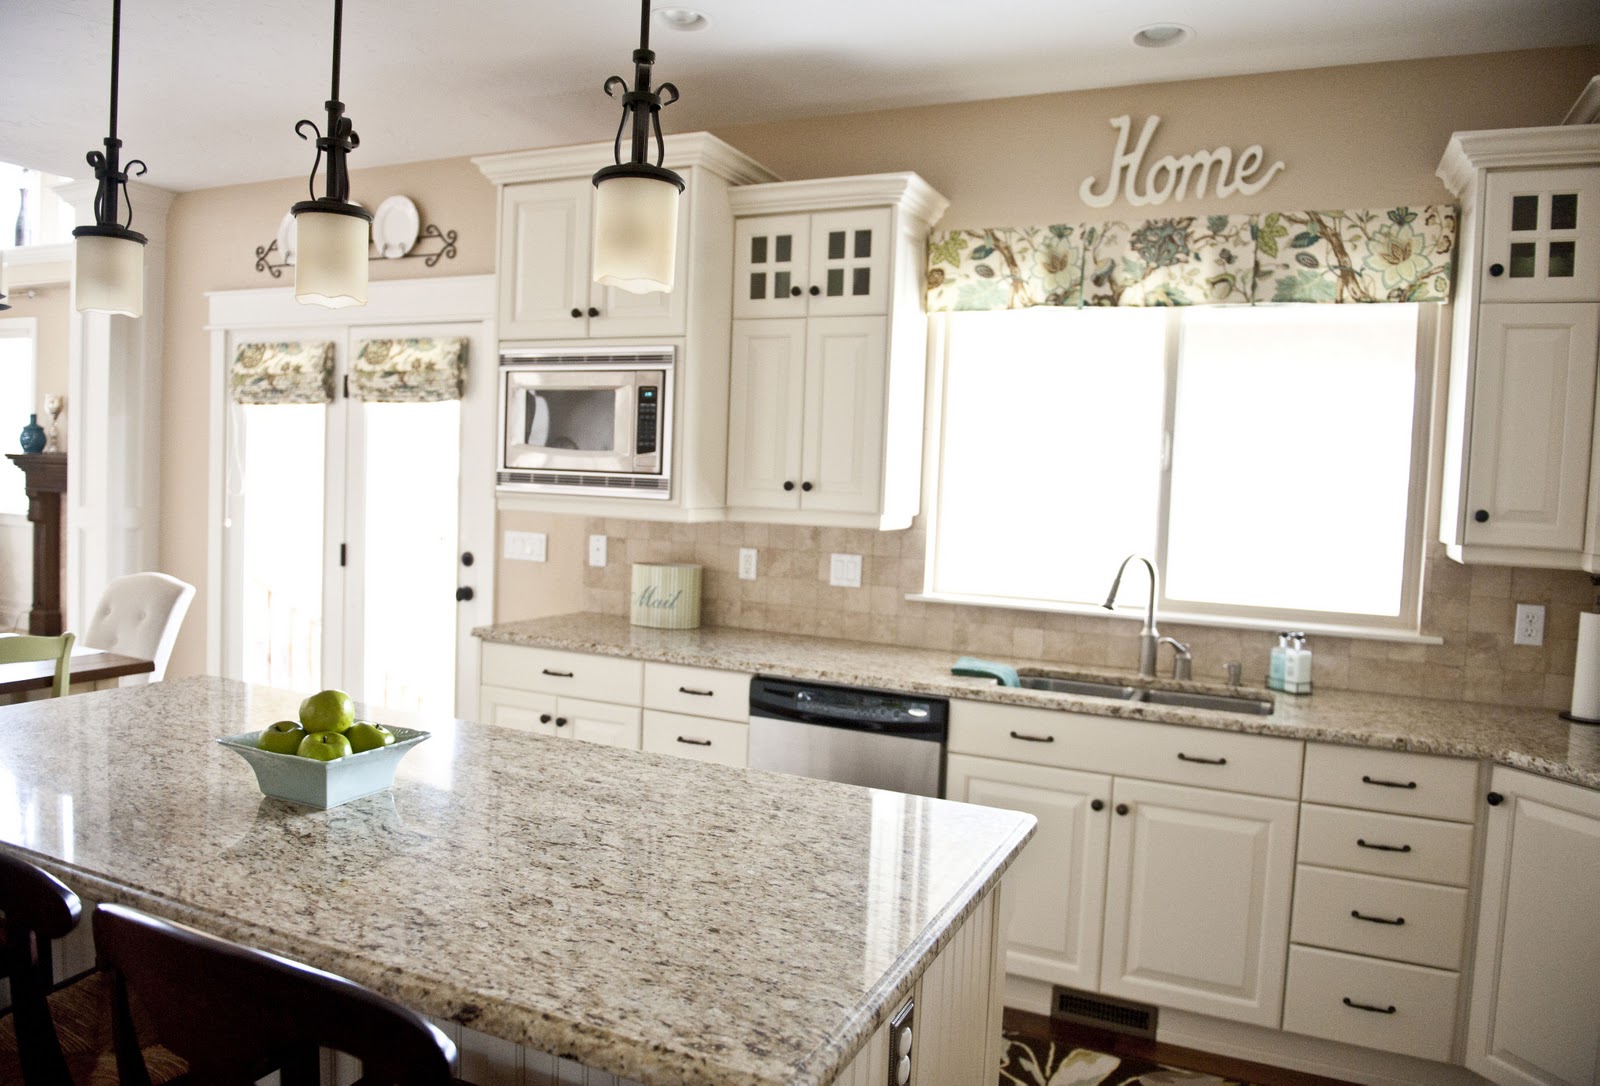 Creatice What Color Countertops Go Best With White Cabinets with Simple Decor